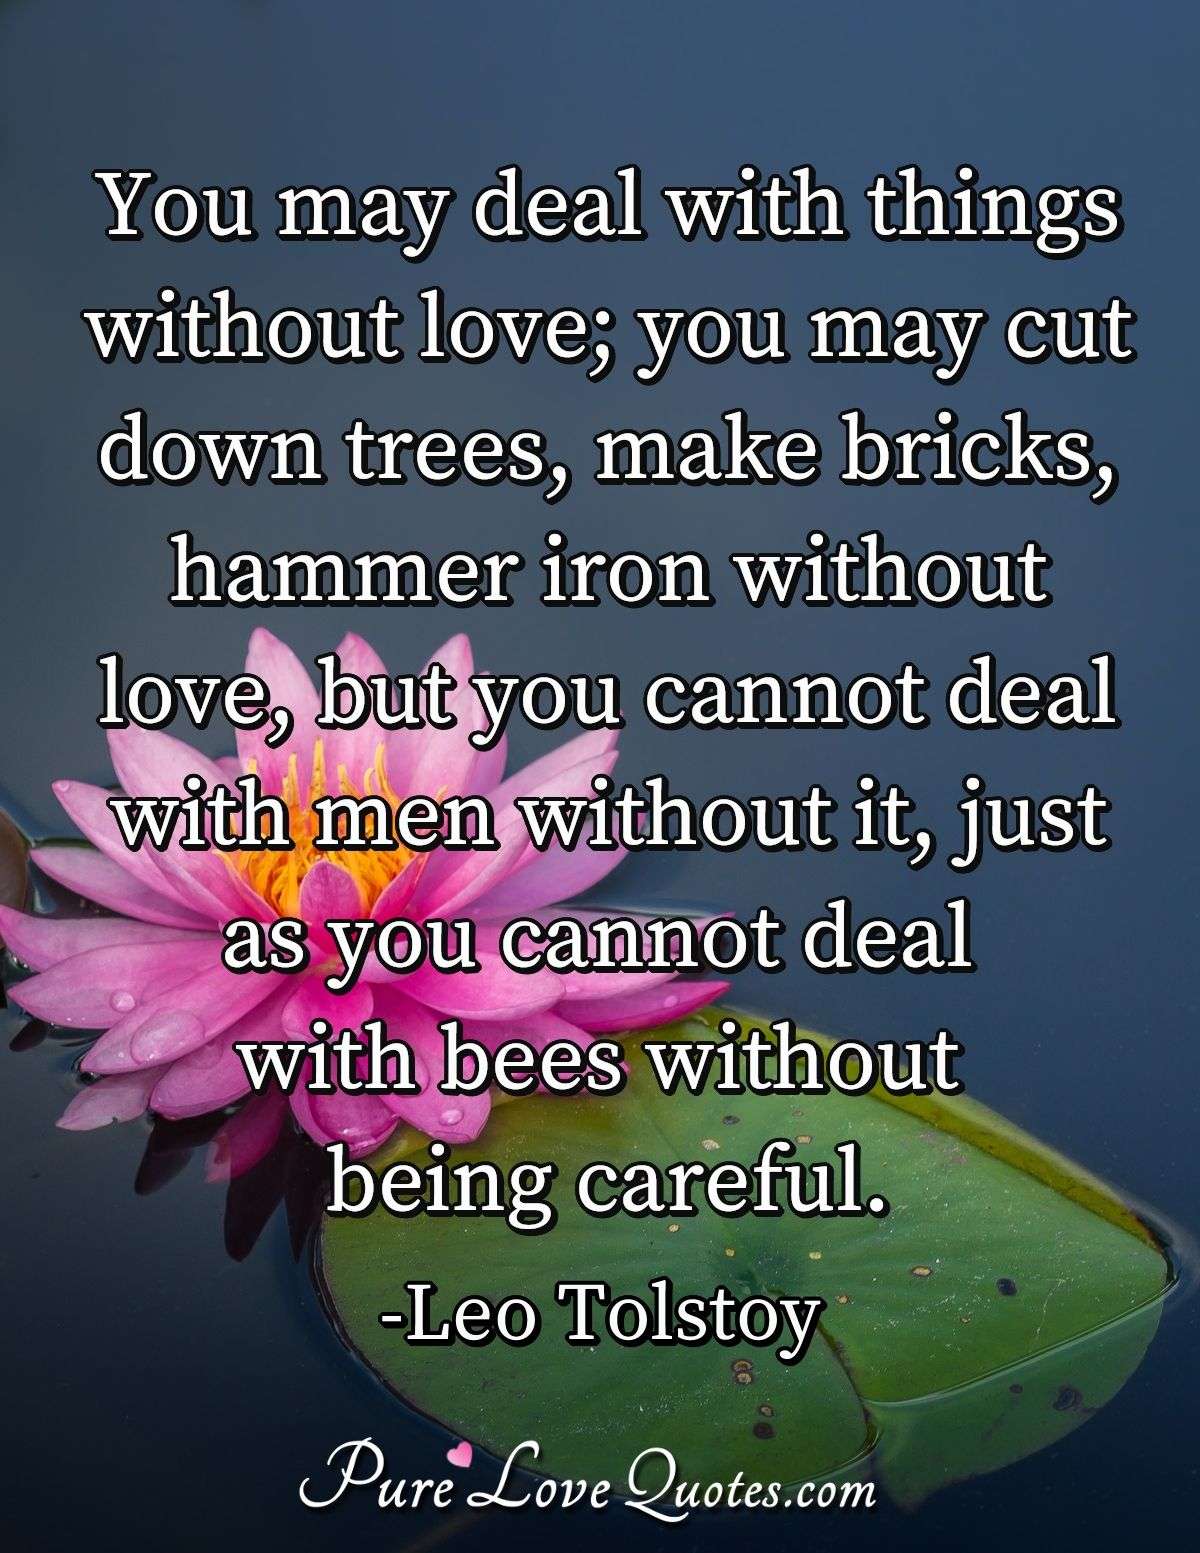 You may deal with things without love; you may cut down trees, make bricks, hammer iron without love, but you cannot deal with men without it, just as you cannot deal with bees without being careful. - Leo Tolstoy